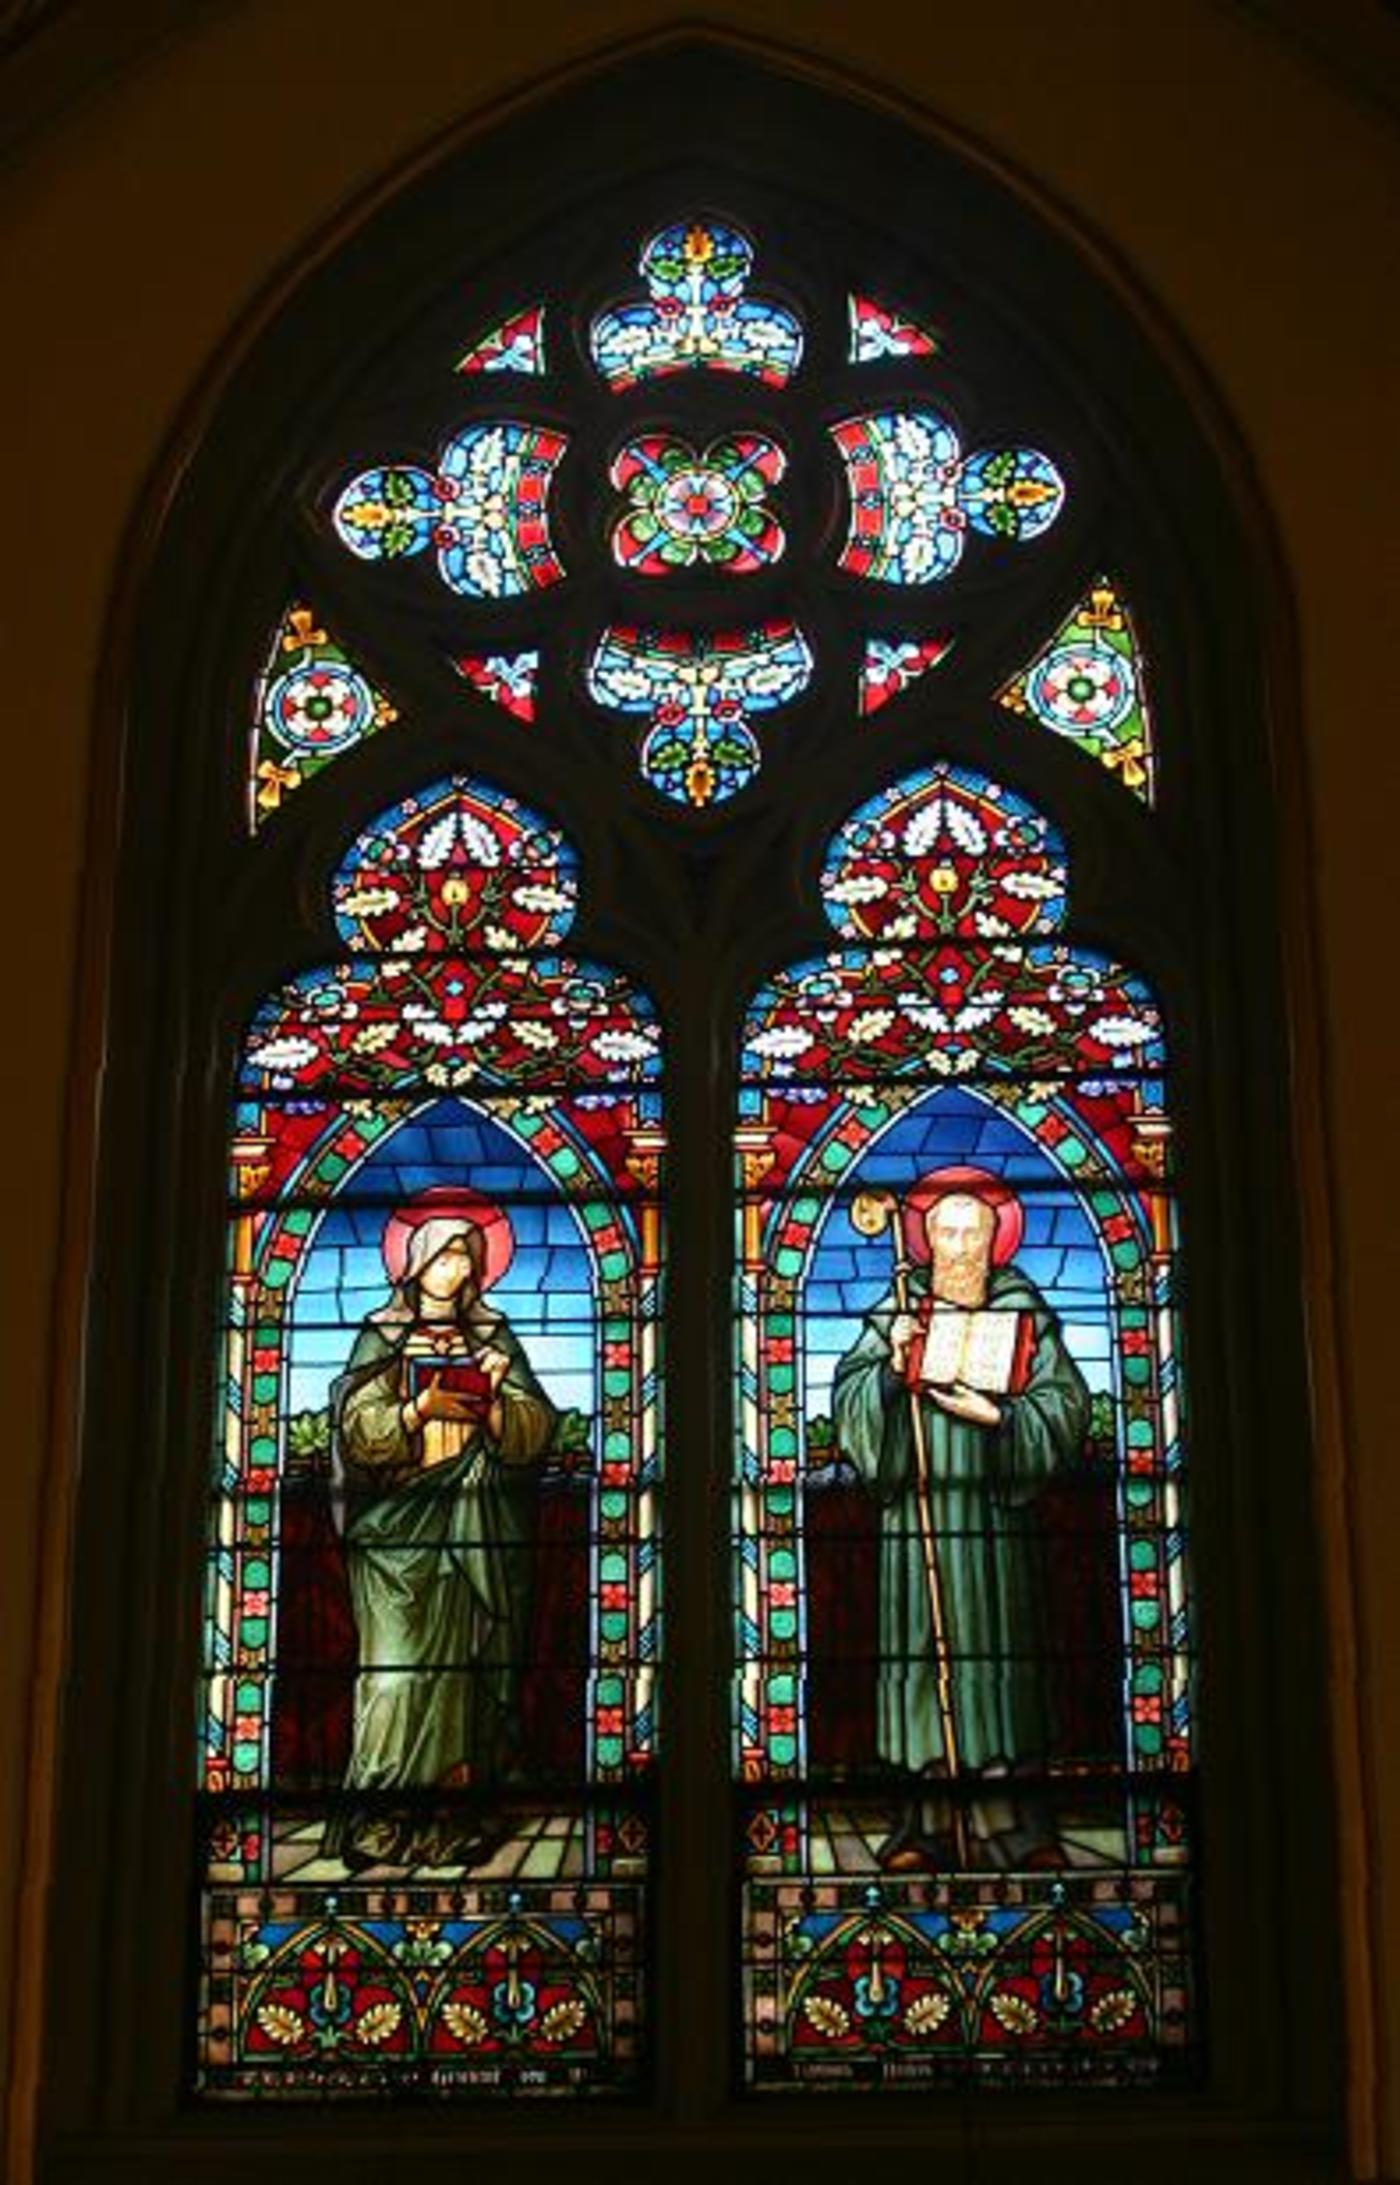 Windows 3A and 3B: St. Scholastica and St. Benedict